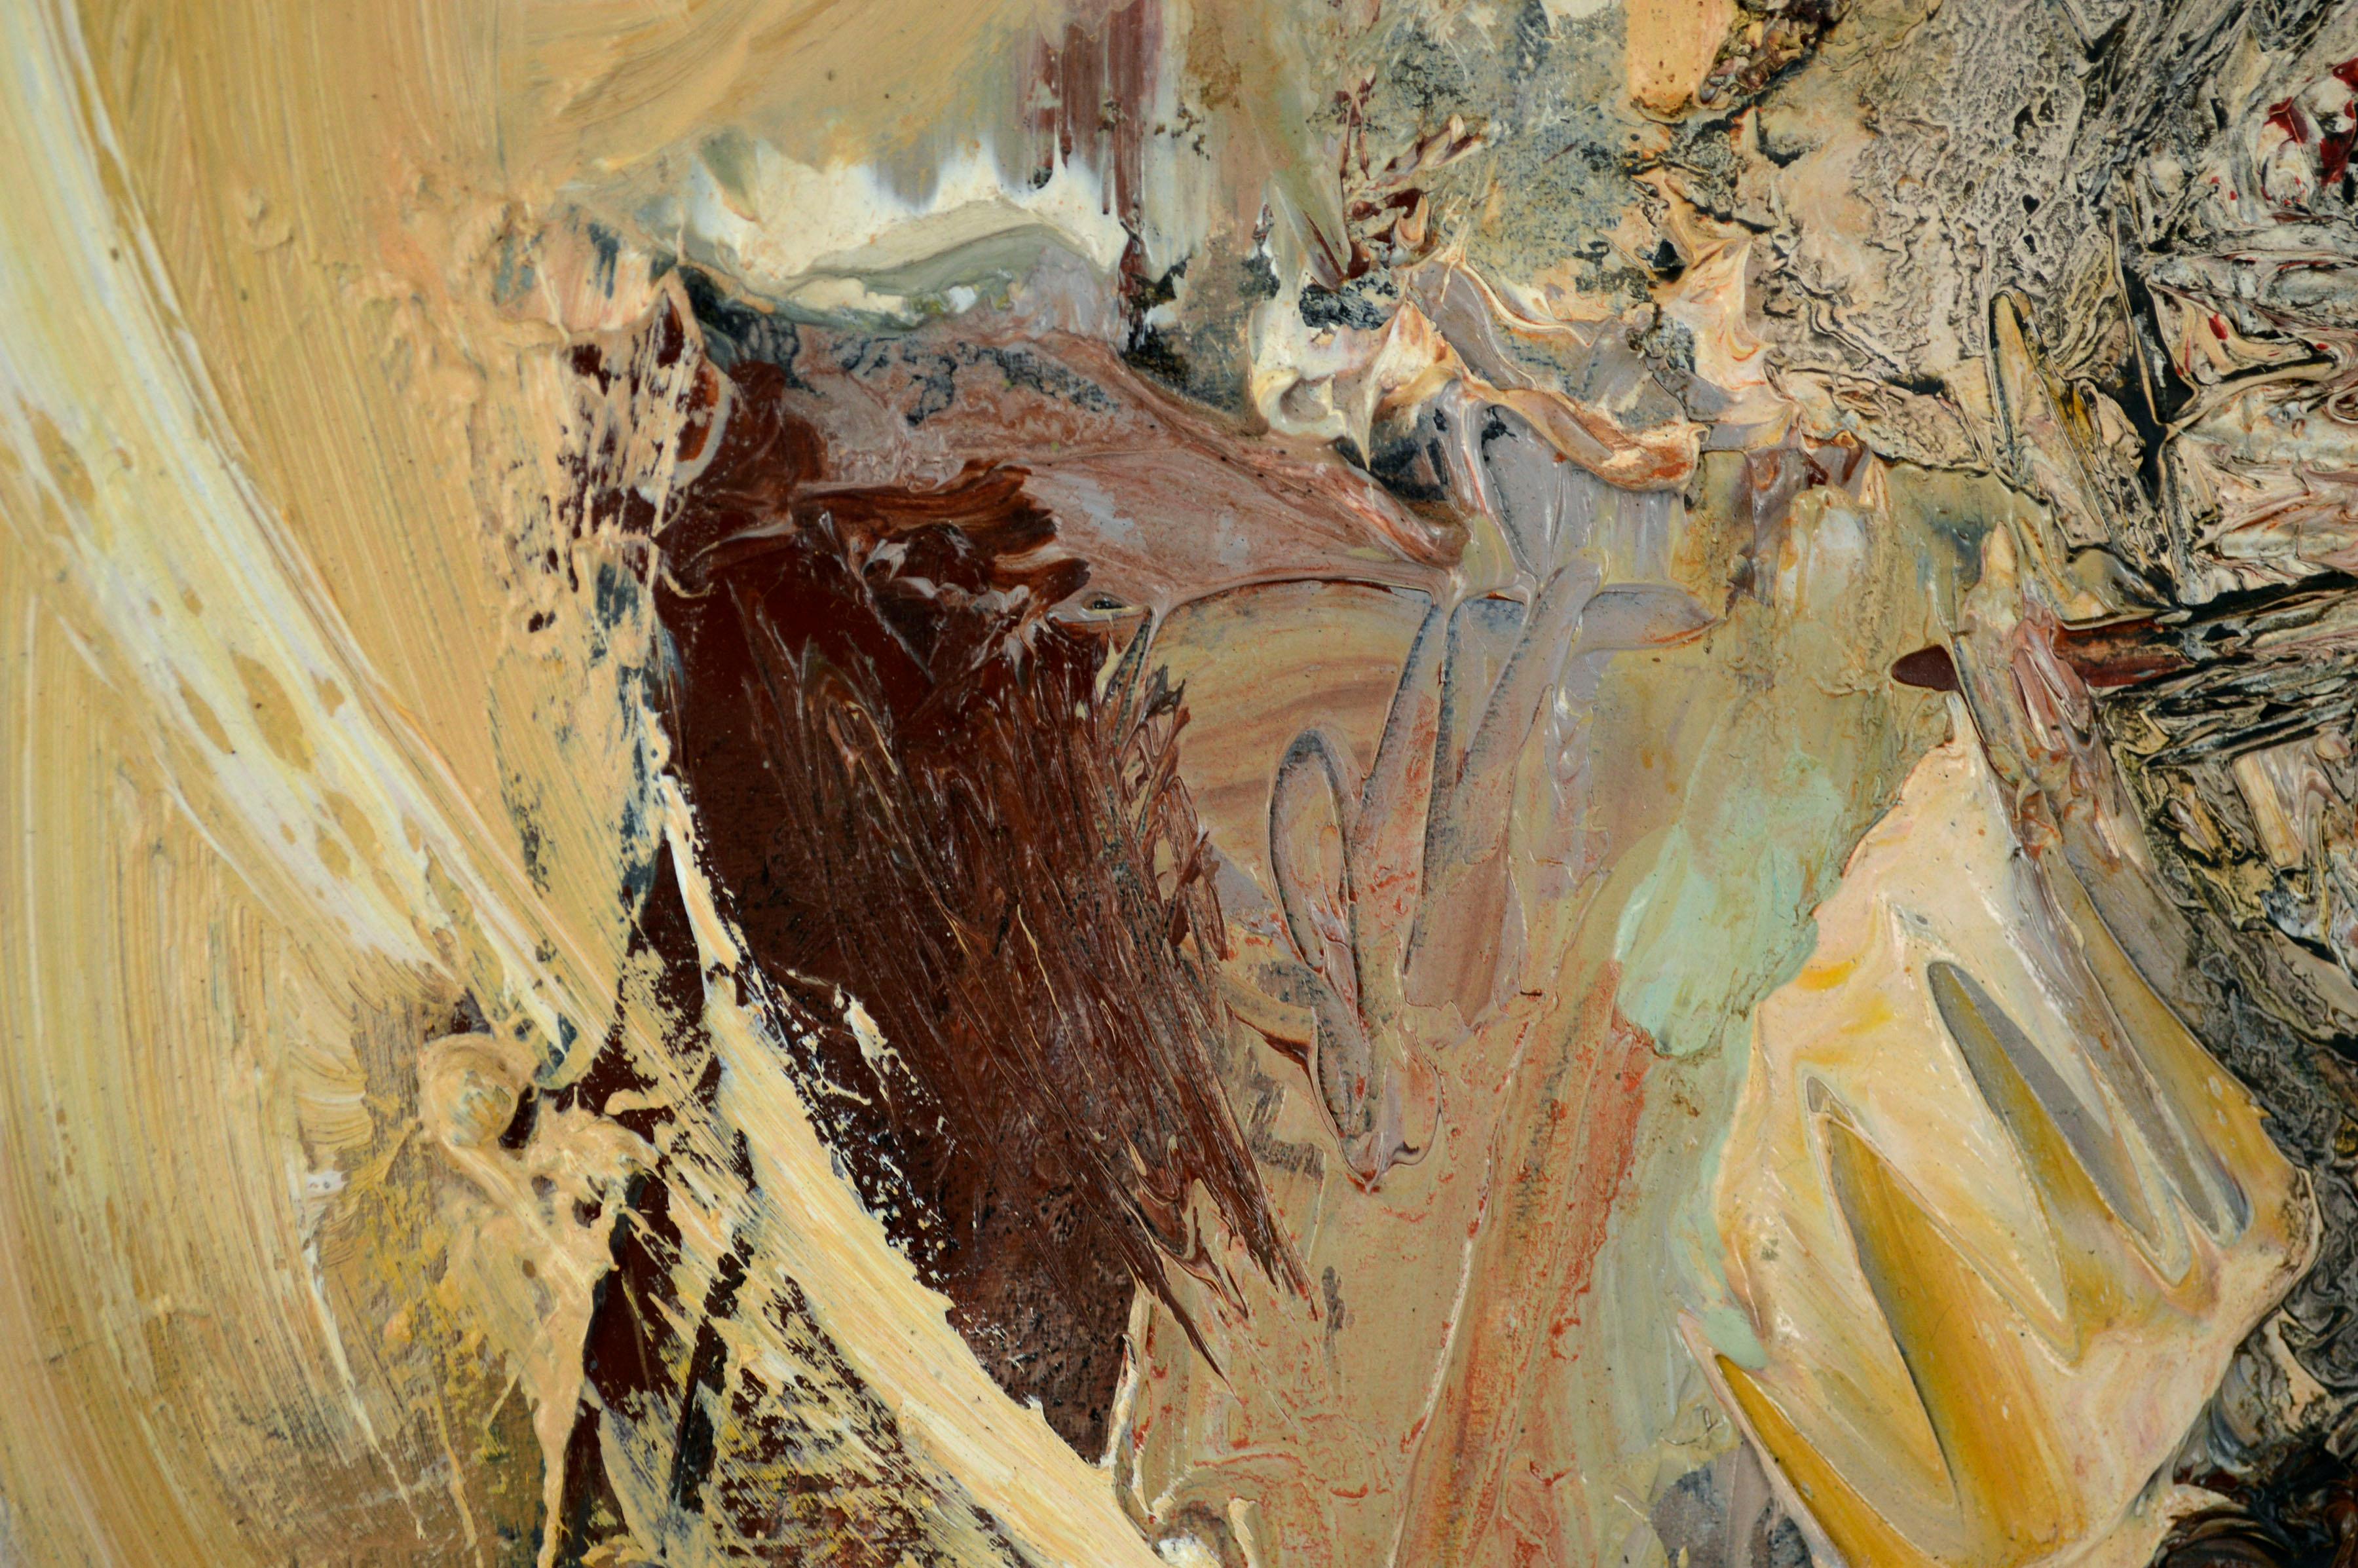 Earth-tone Abstract Expressionist with Impasto & Textured Fibers 2